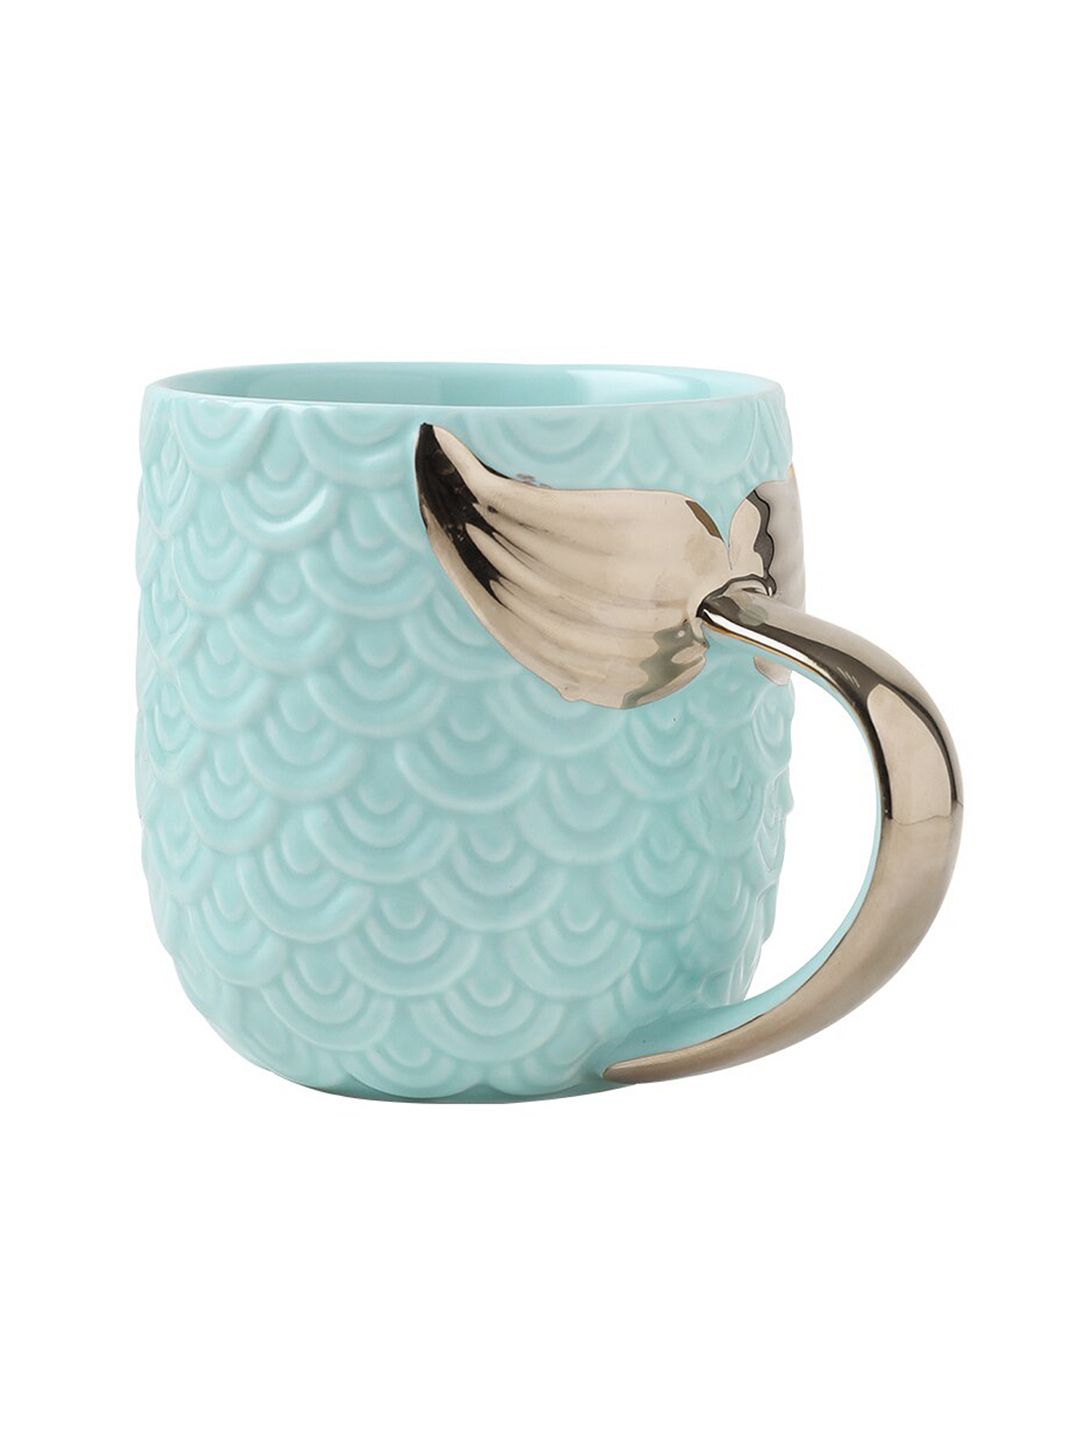 BonZeaL Turquoise Blue & Gold-Toned 3D Mermaid Tail Ceramic Glossy Cups Price in India